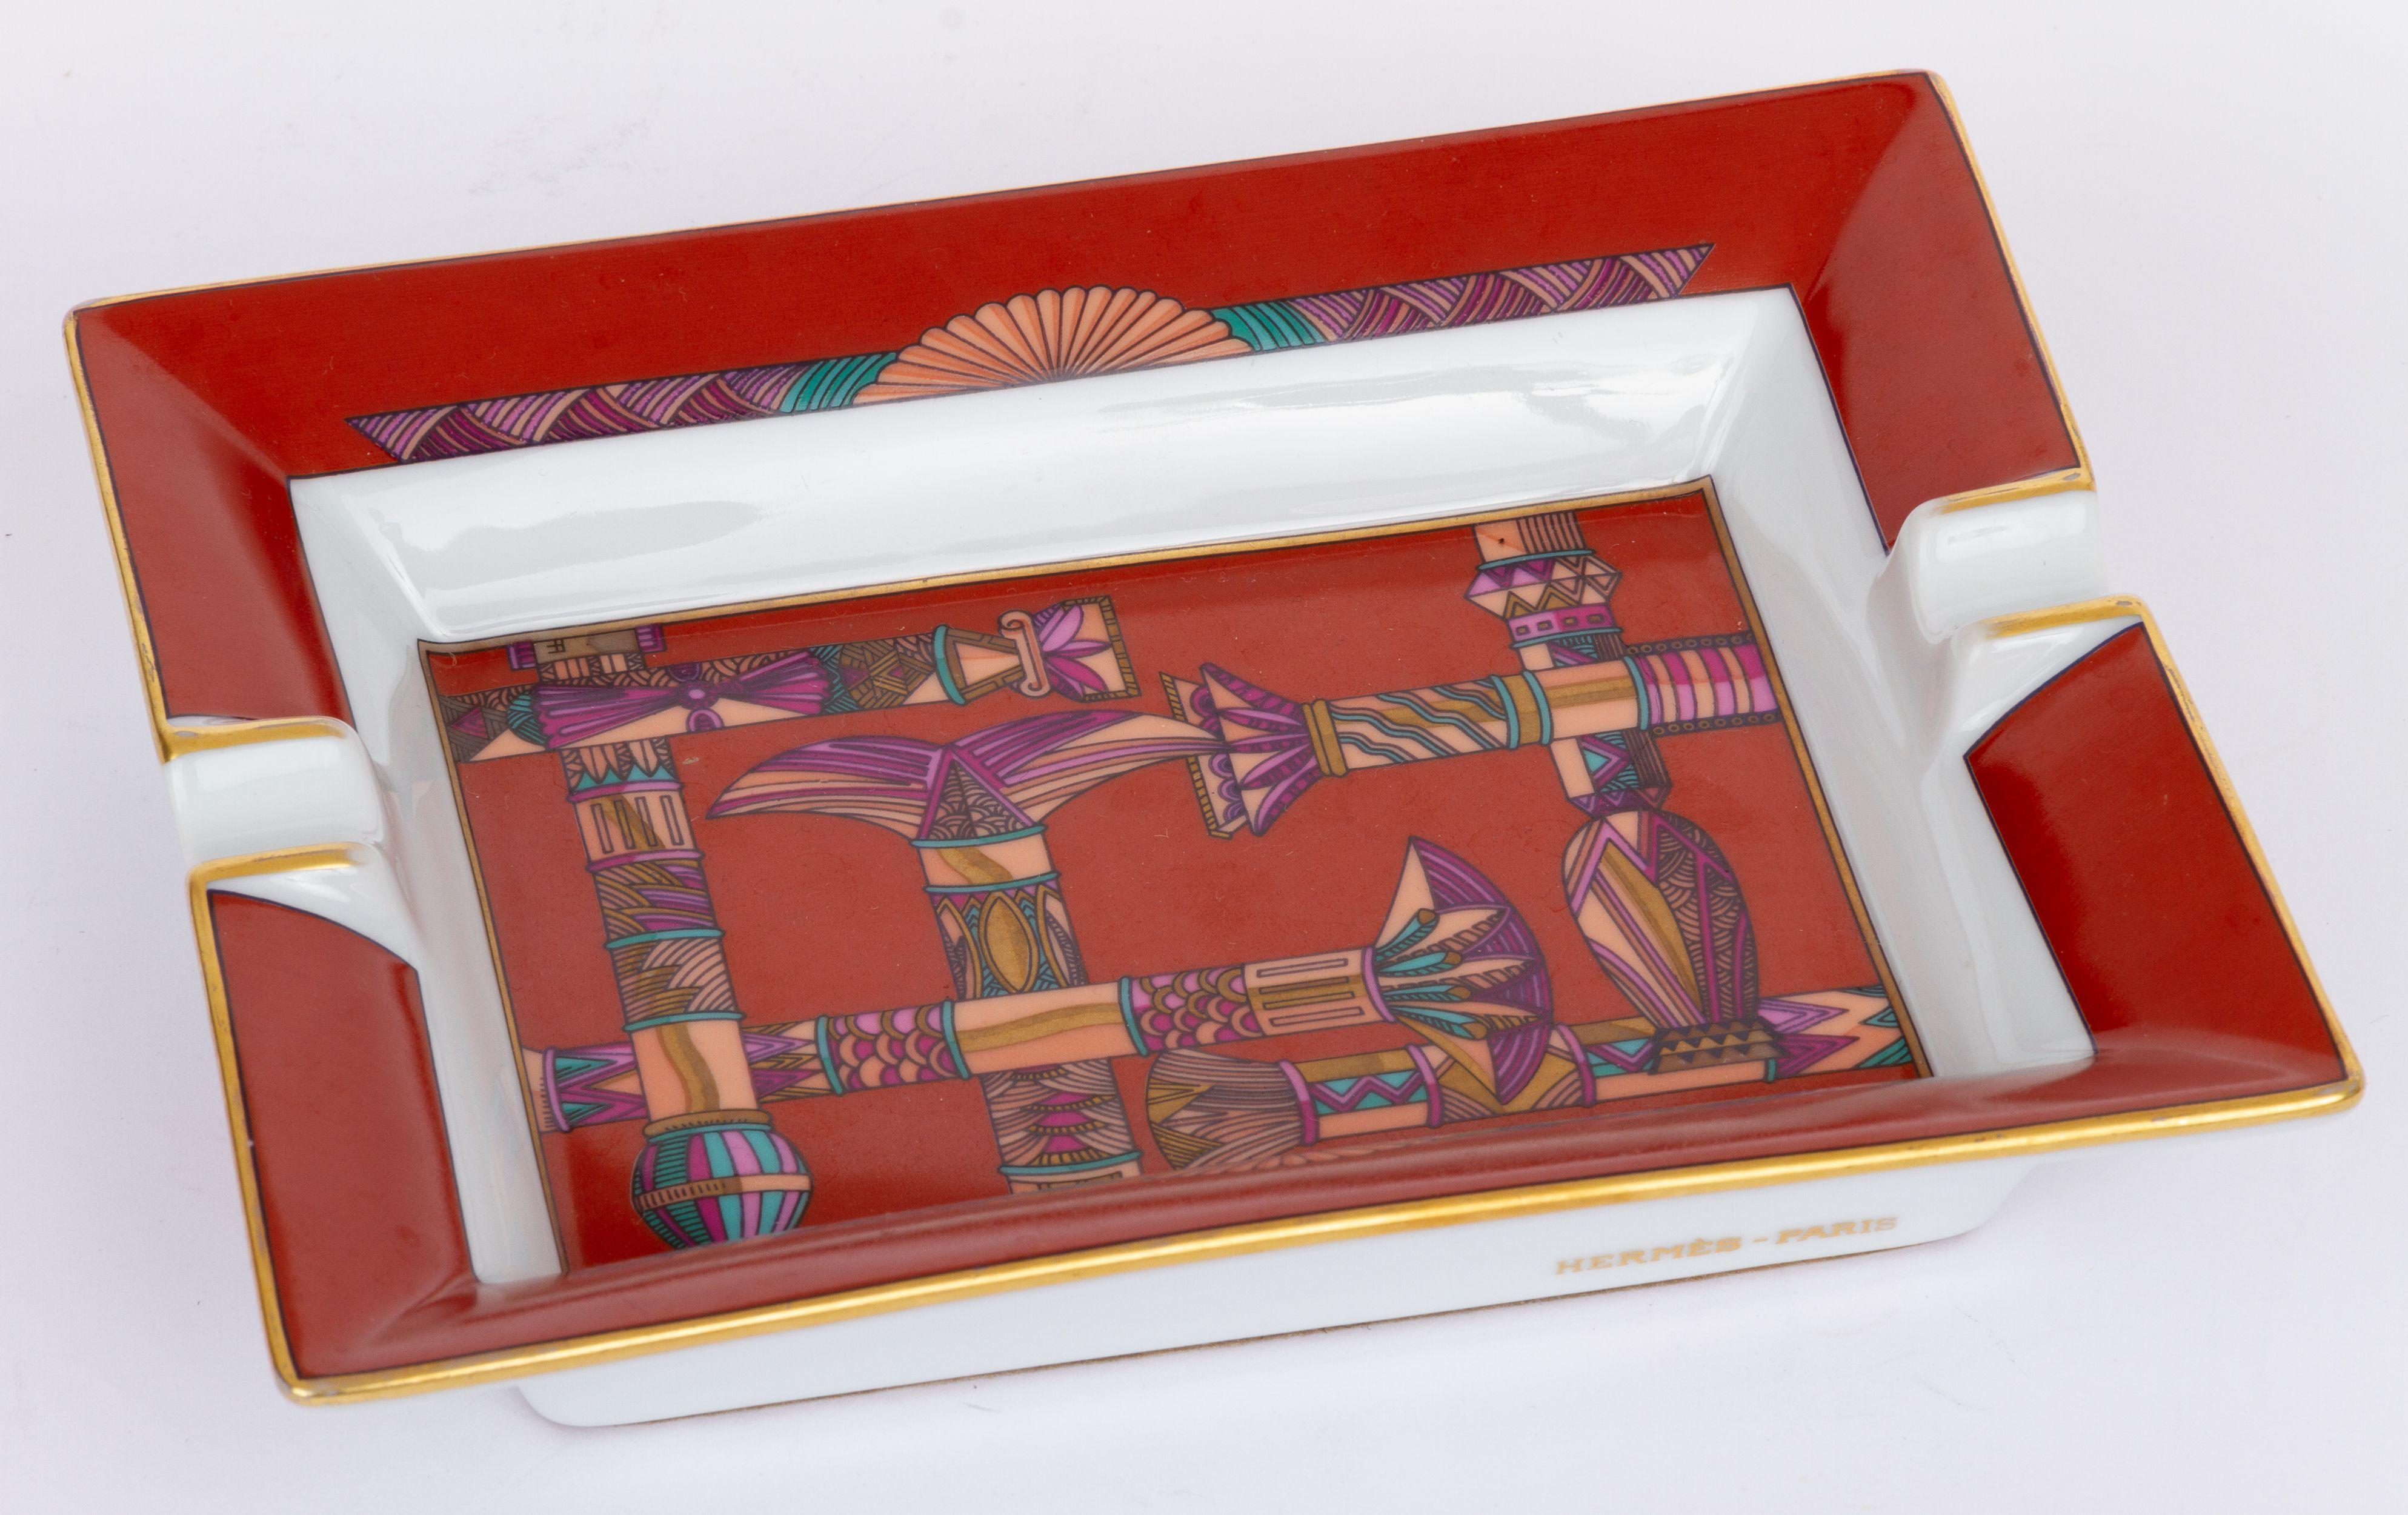 Hermès vintage ashtray in the main color red. The center of the piece shows a print of different columns. It is in excellent condition.